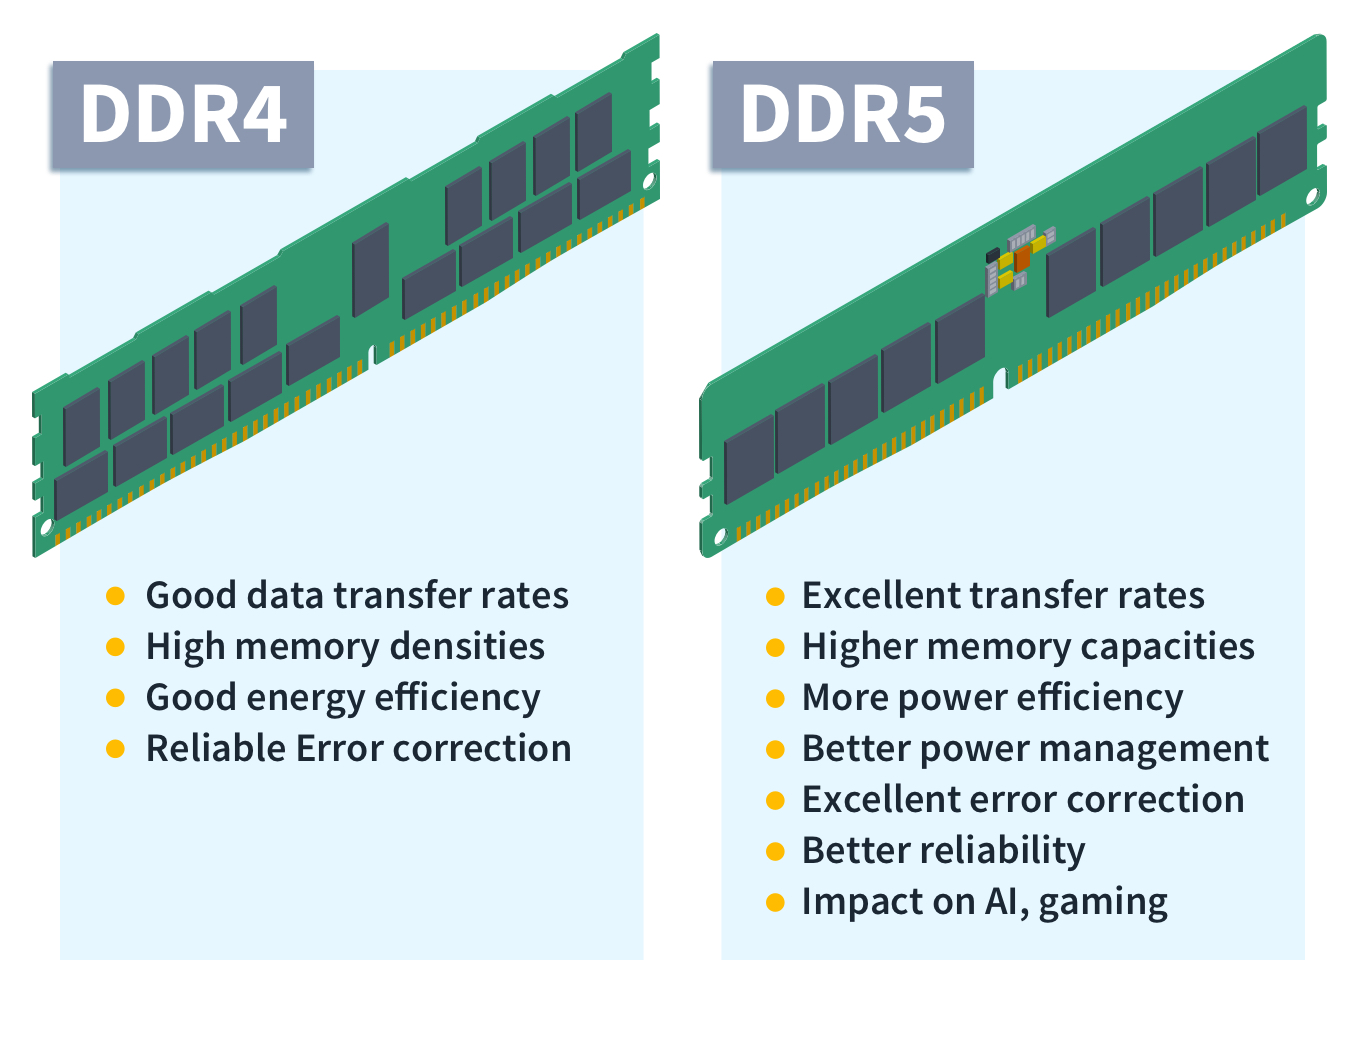 DDR6 is Four Times as Fast as DDR4 and Already in the Works